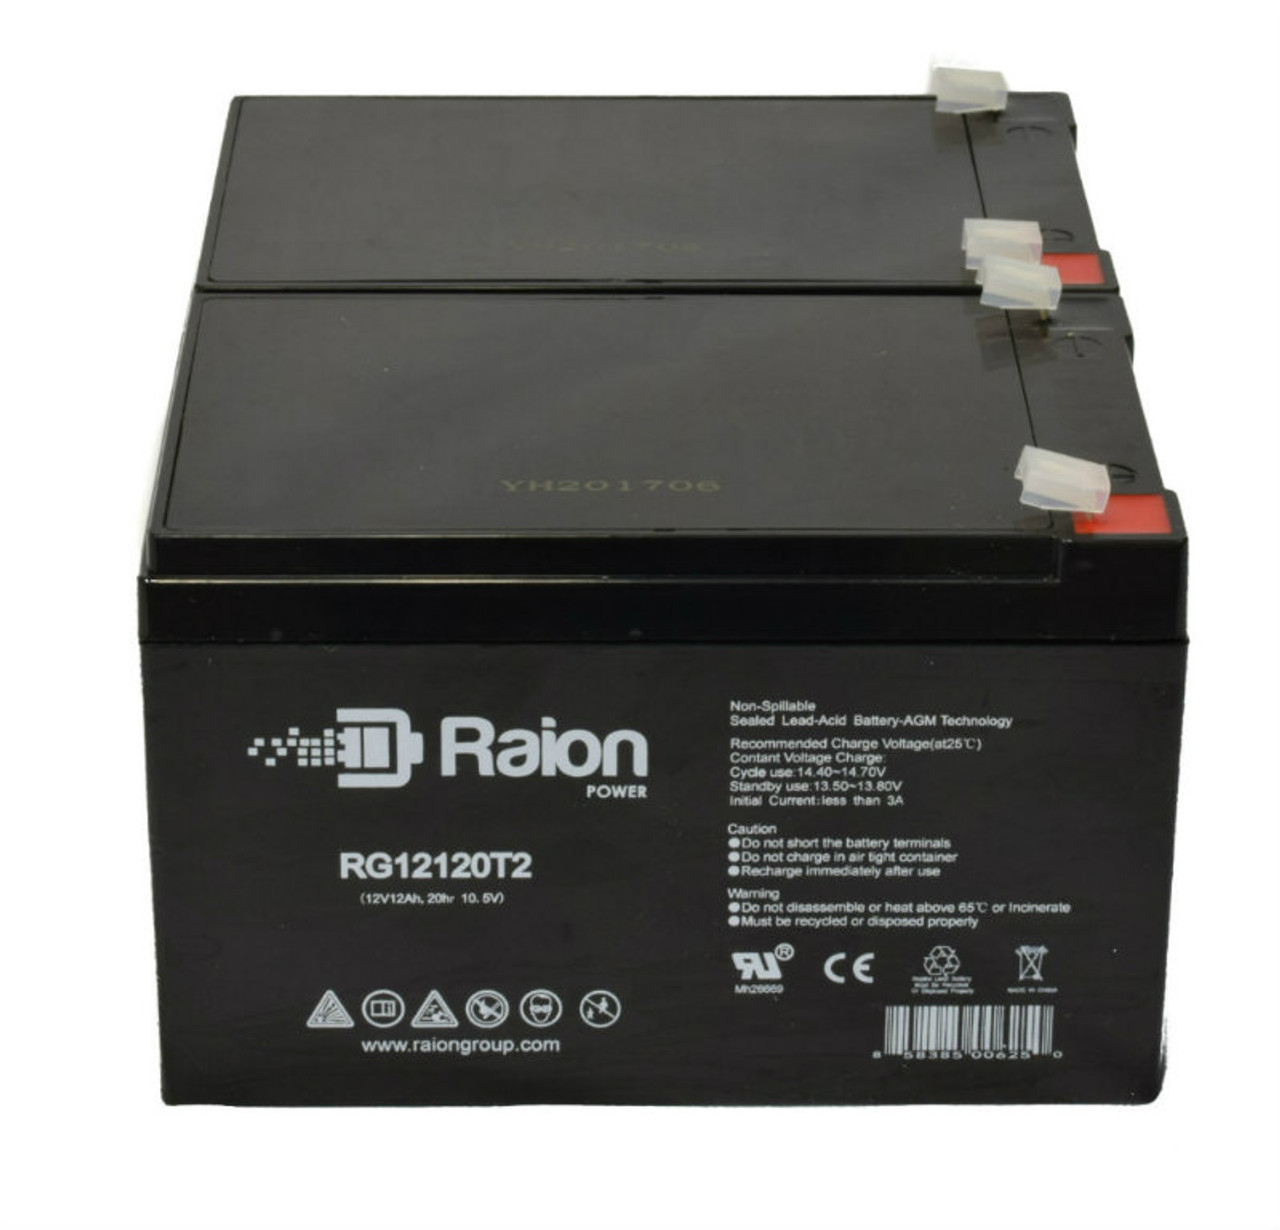 Raion Power 12V 12Ah Non-Spillable Compatible Replacement Battery for Leadhoo NP12-12 - (2 Pack)